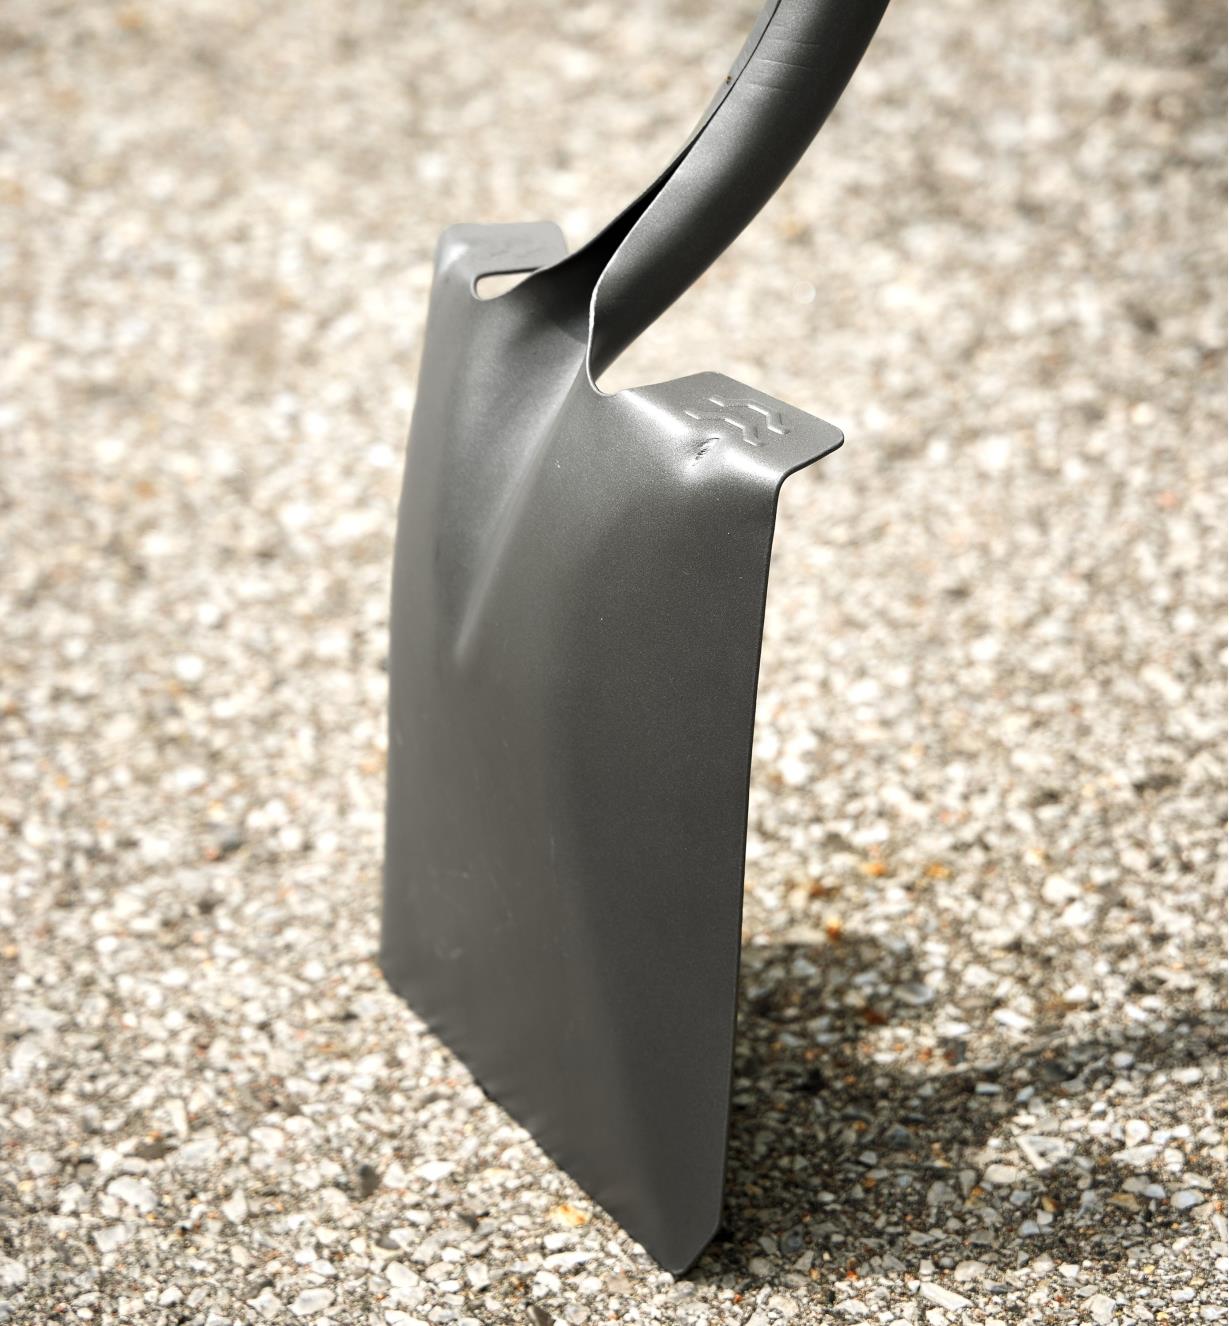 Back view of the long-handled square shovel head showing large textured treads